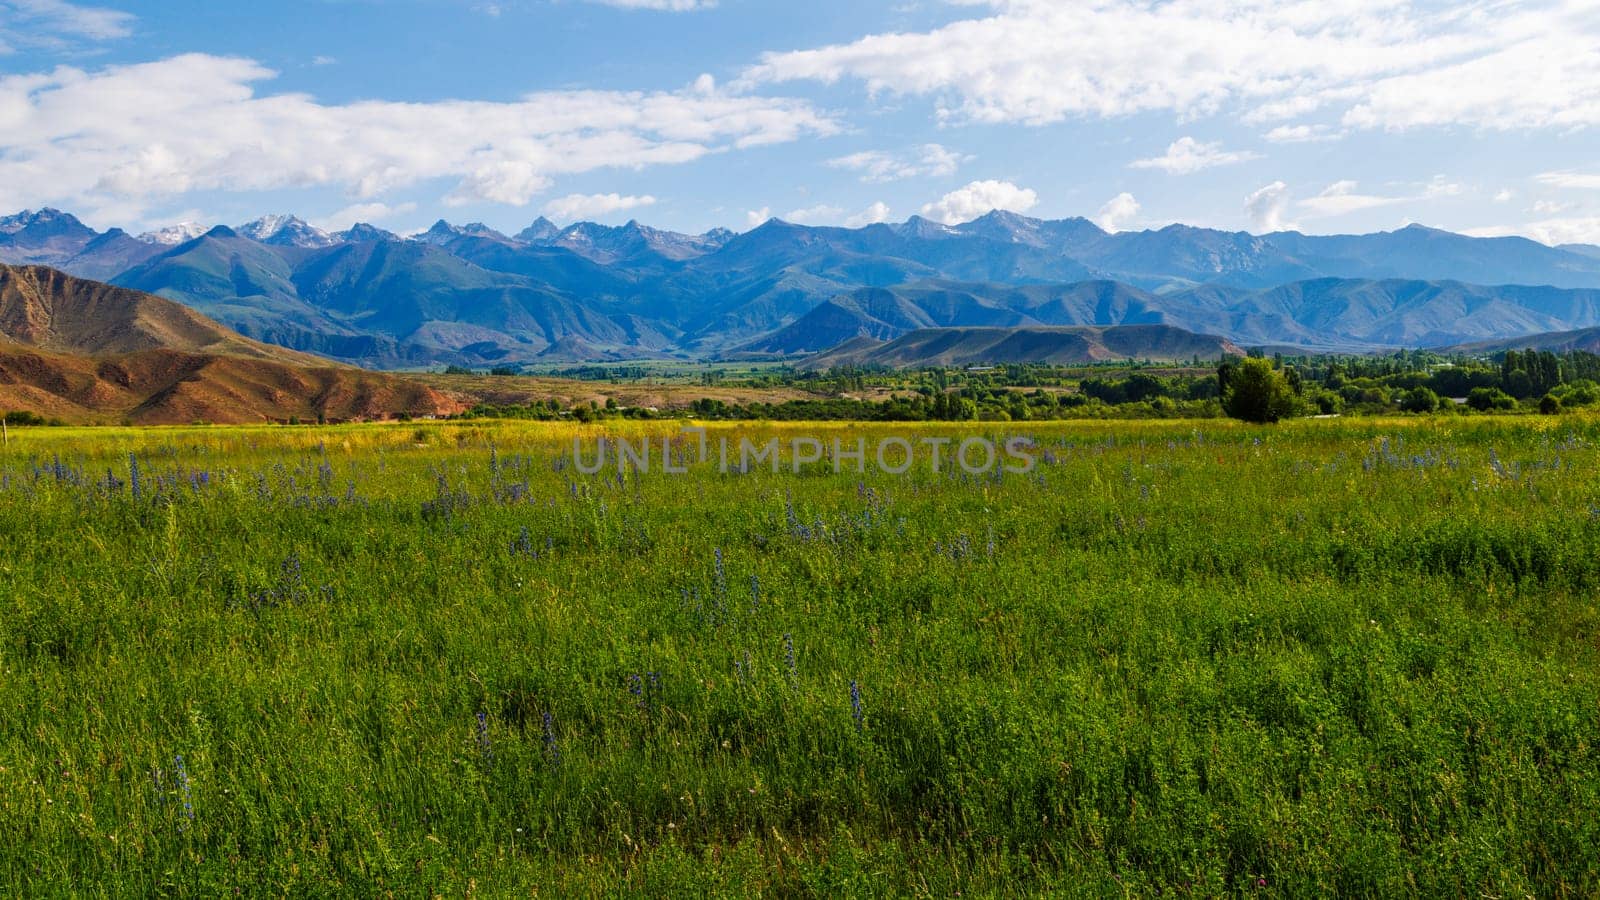 A picturesque natural landscape of purple flowers blooming in a field with mountains in the background under a blue sky with fluffy cumulus clouds.